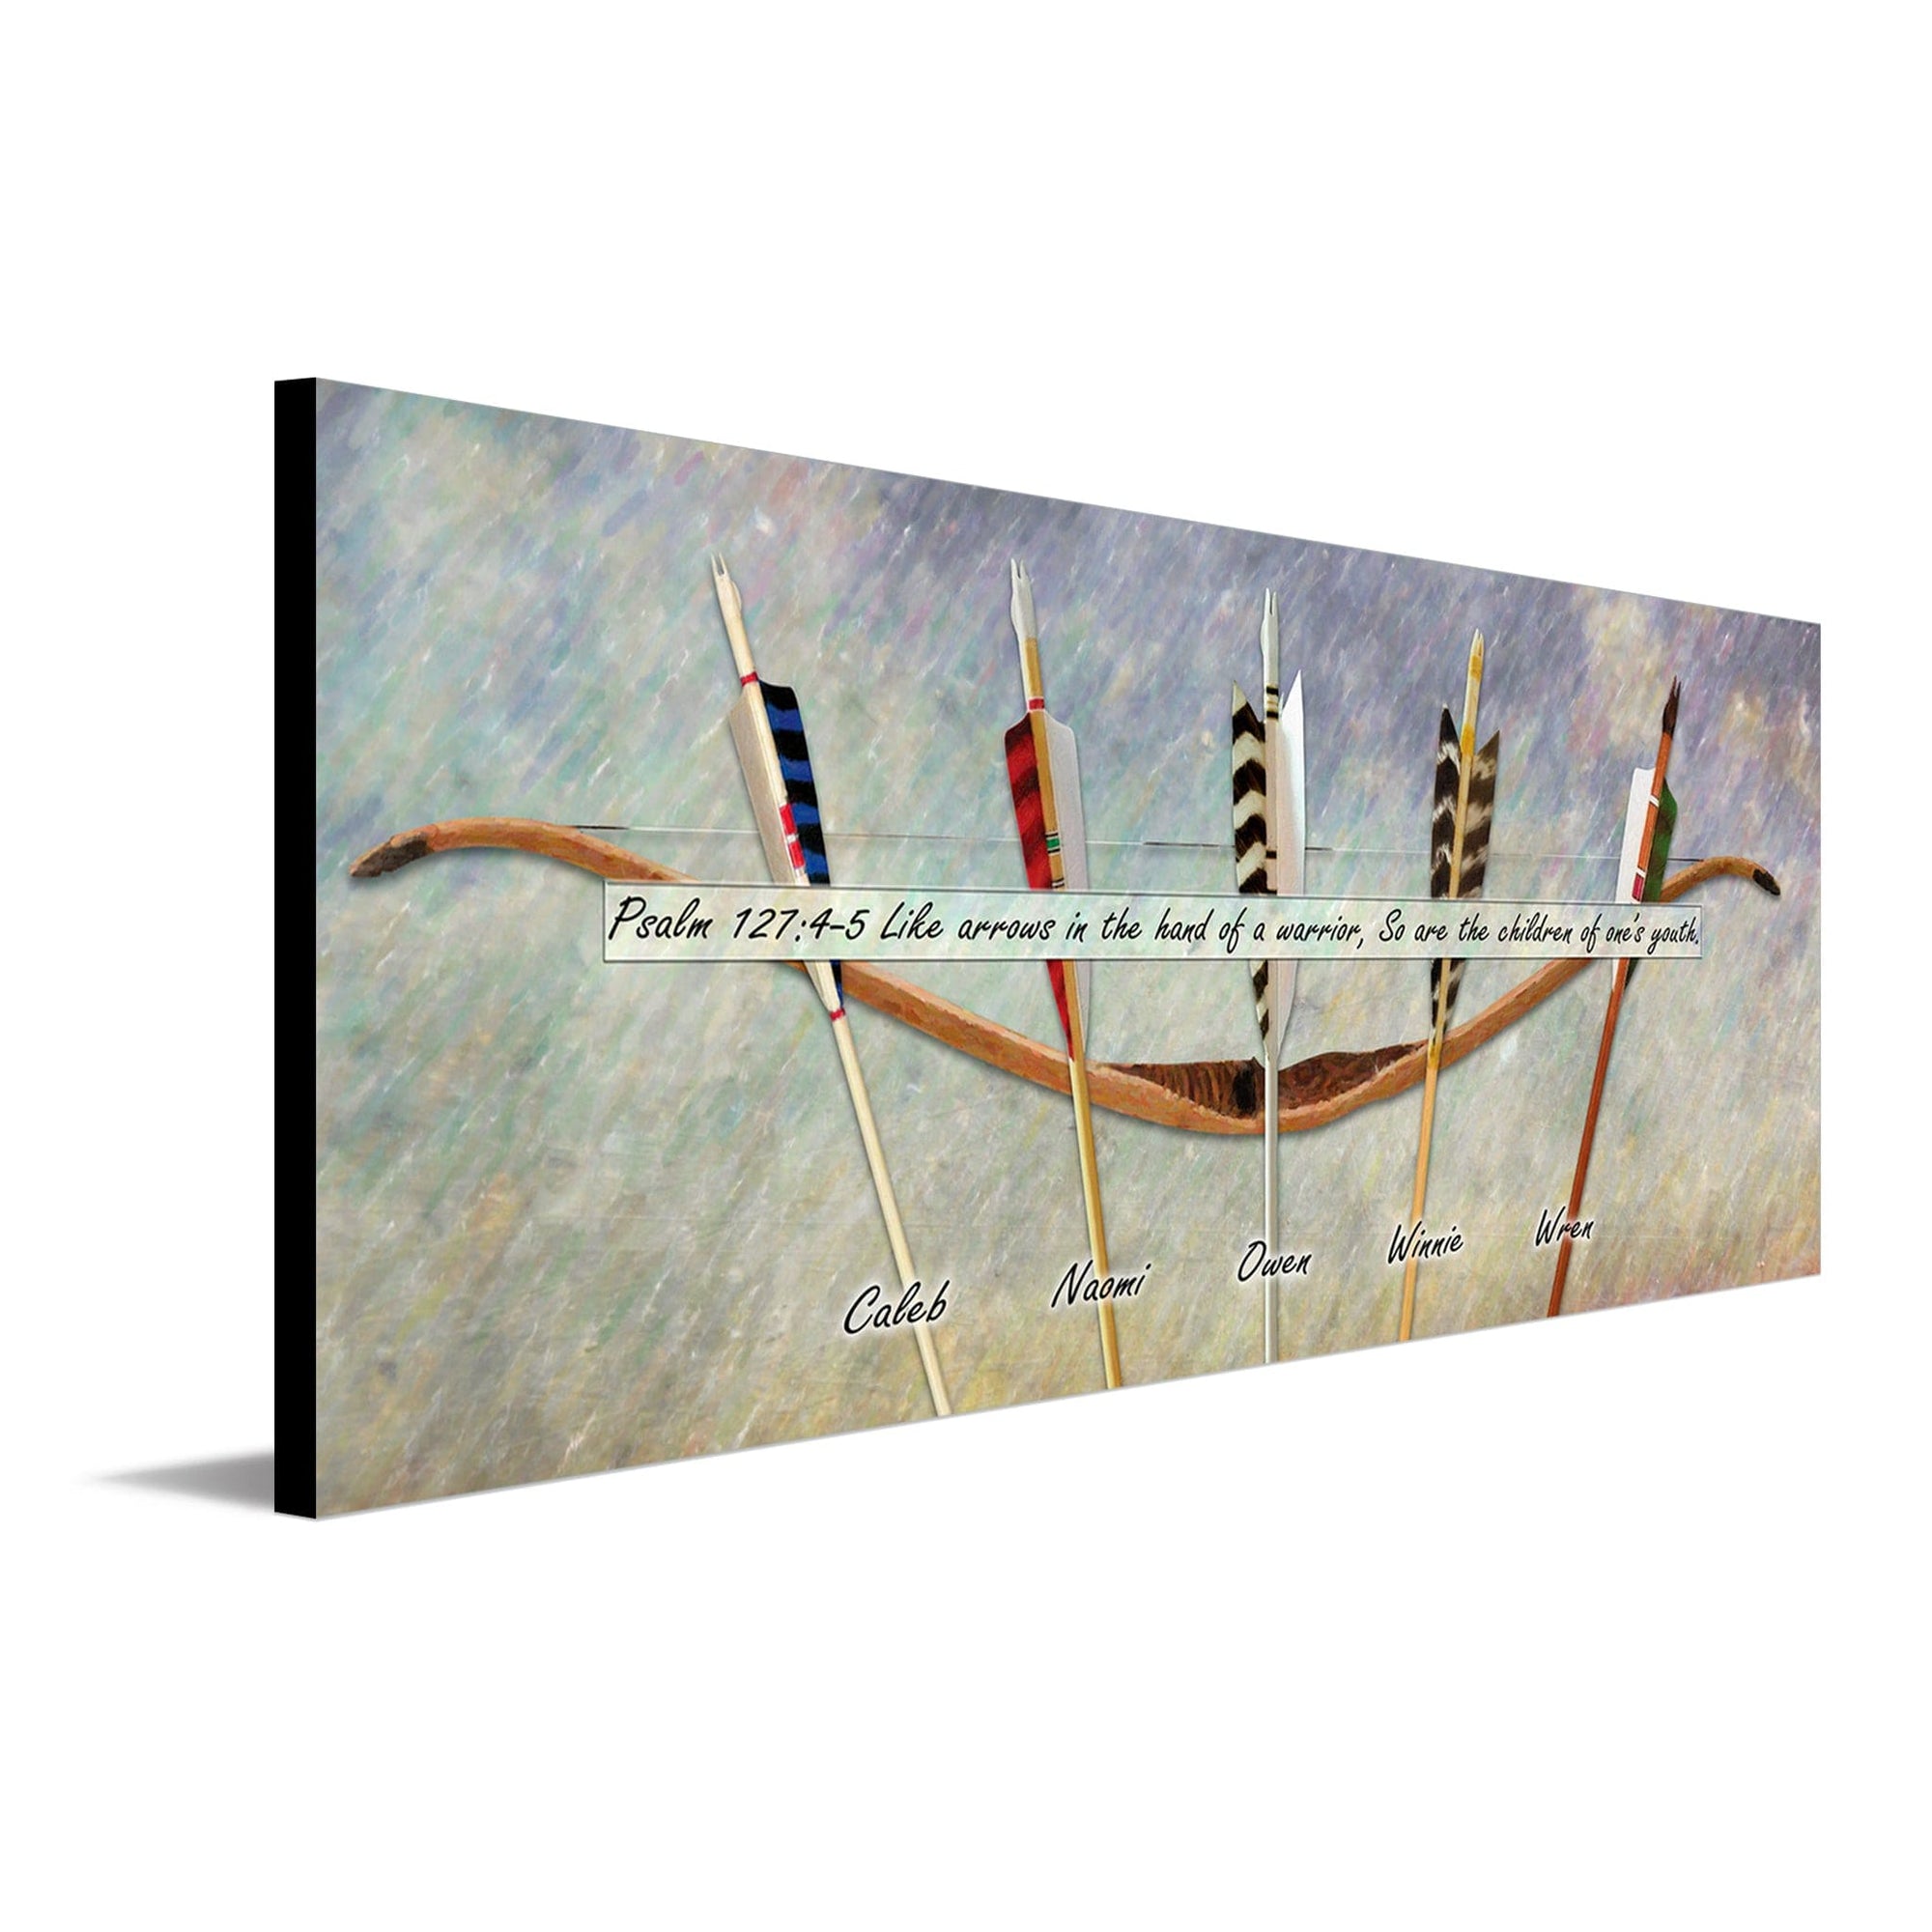 Personalized archery gift for Dad with the names of his kids on the arrows.